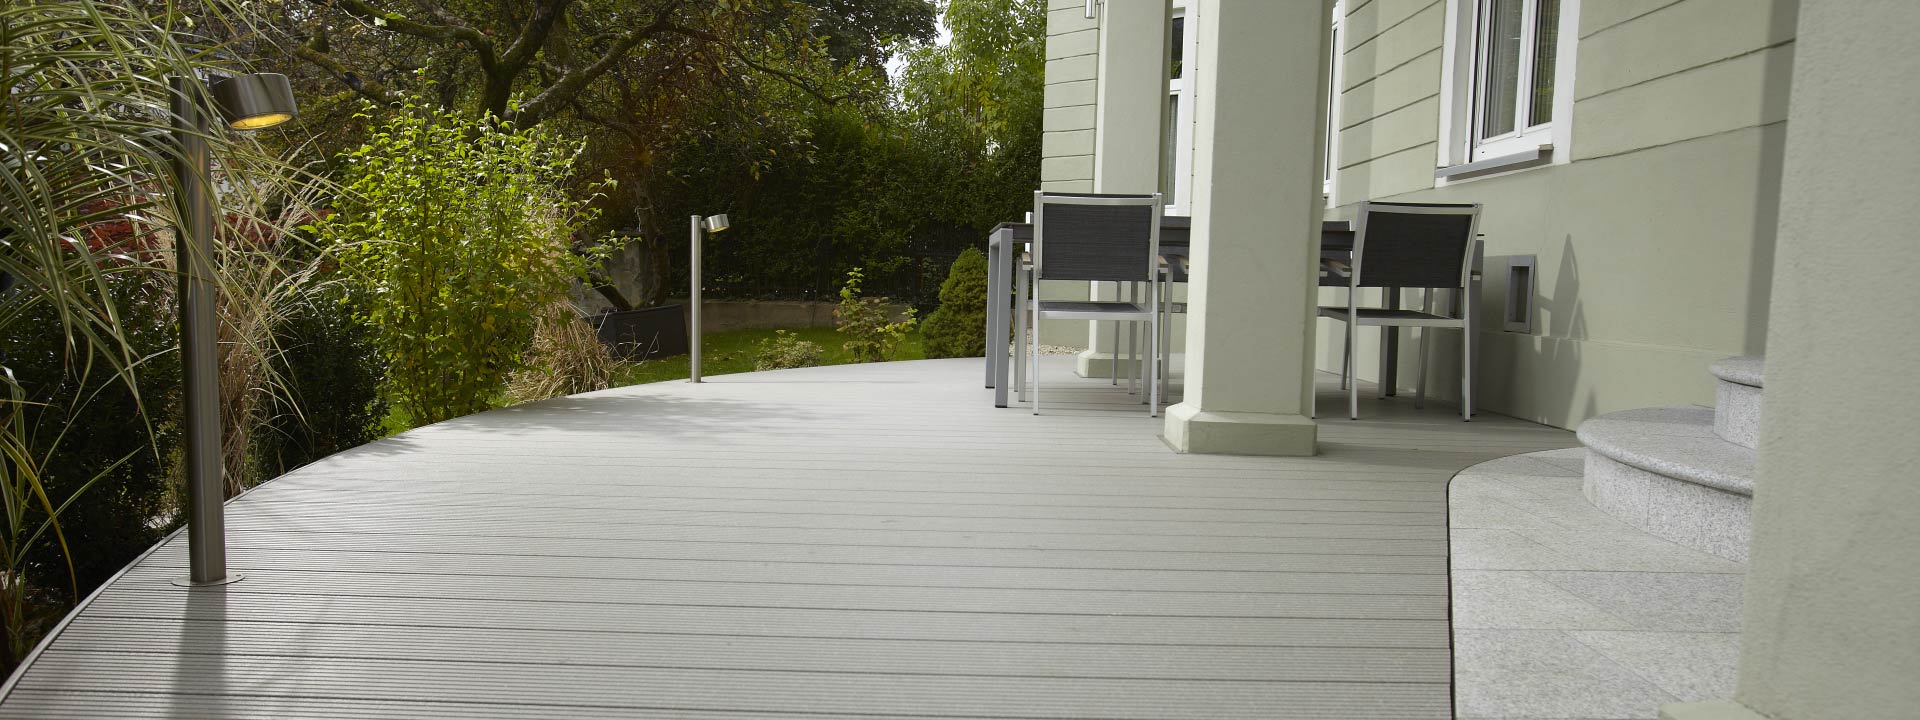 Composite decking with unique stain resistance surface